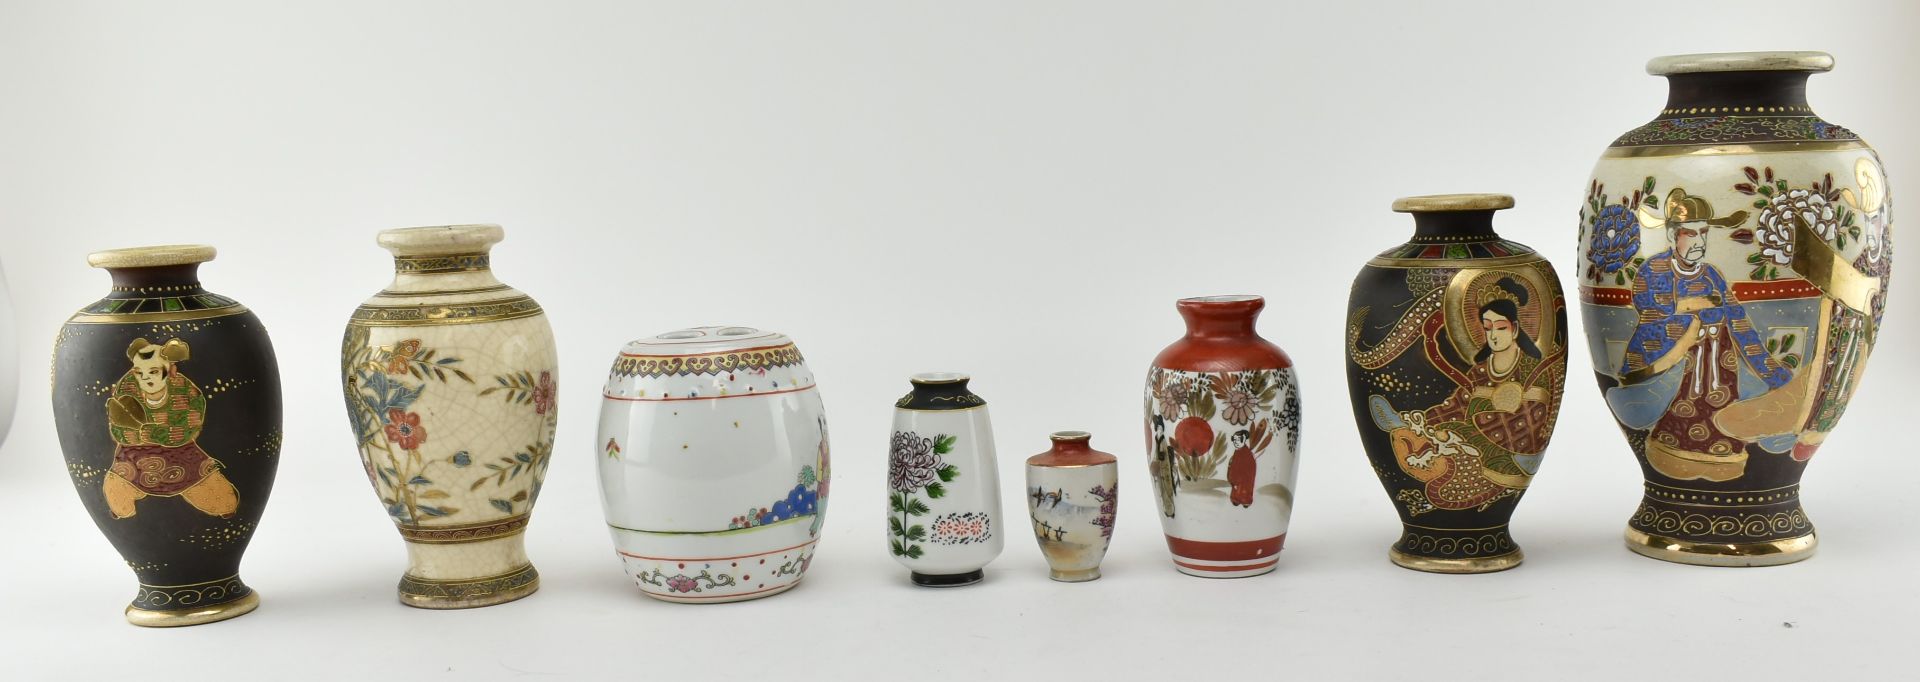 COLLECTION OF 8 20TH CENTURY CHINESE & JAPANESE VASES